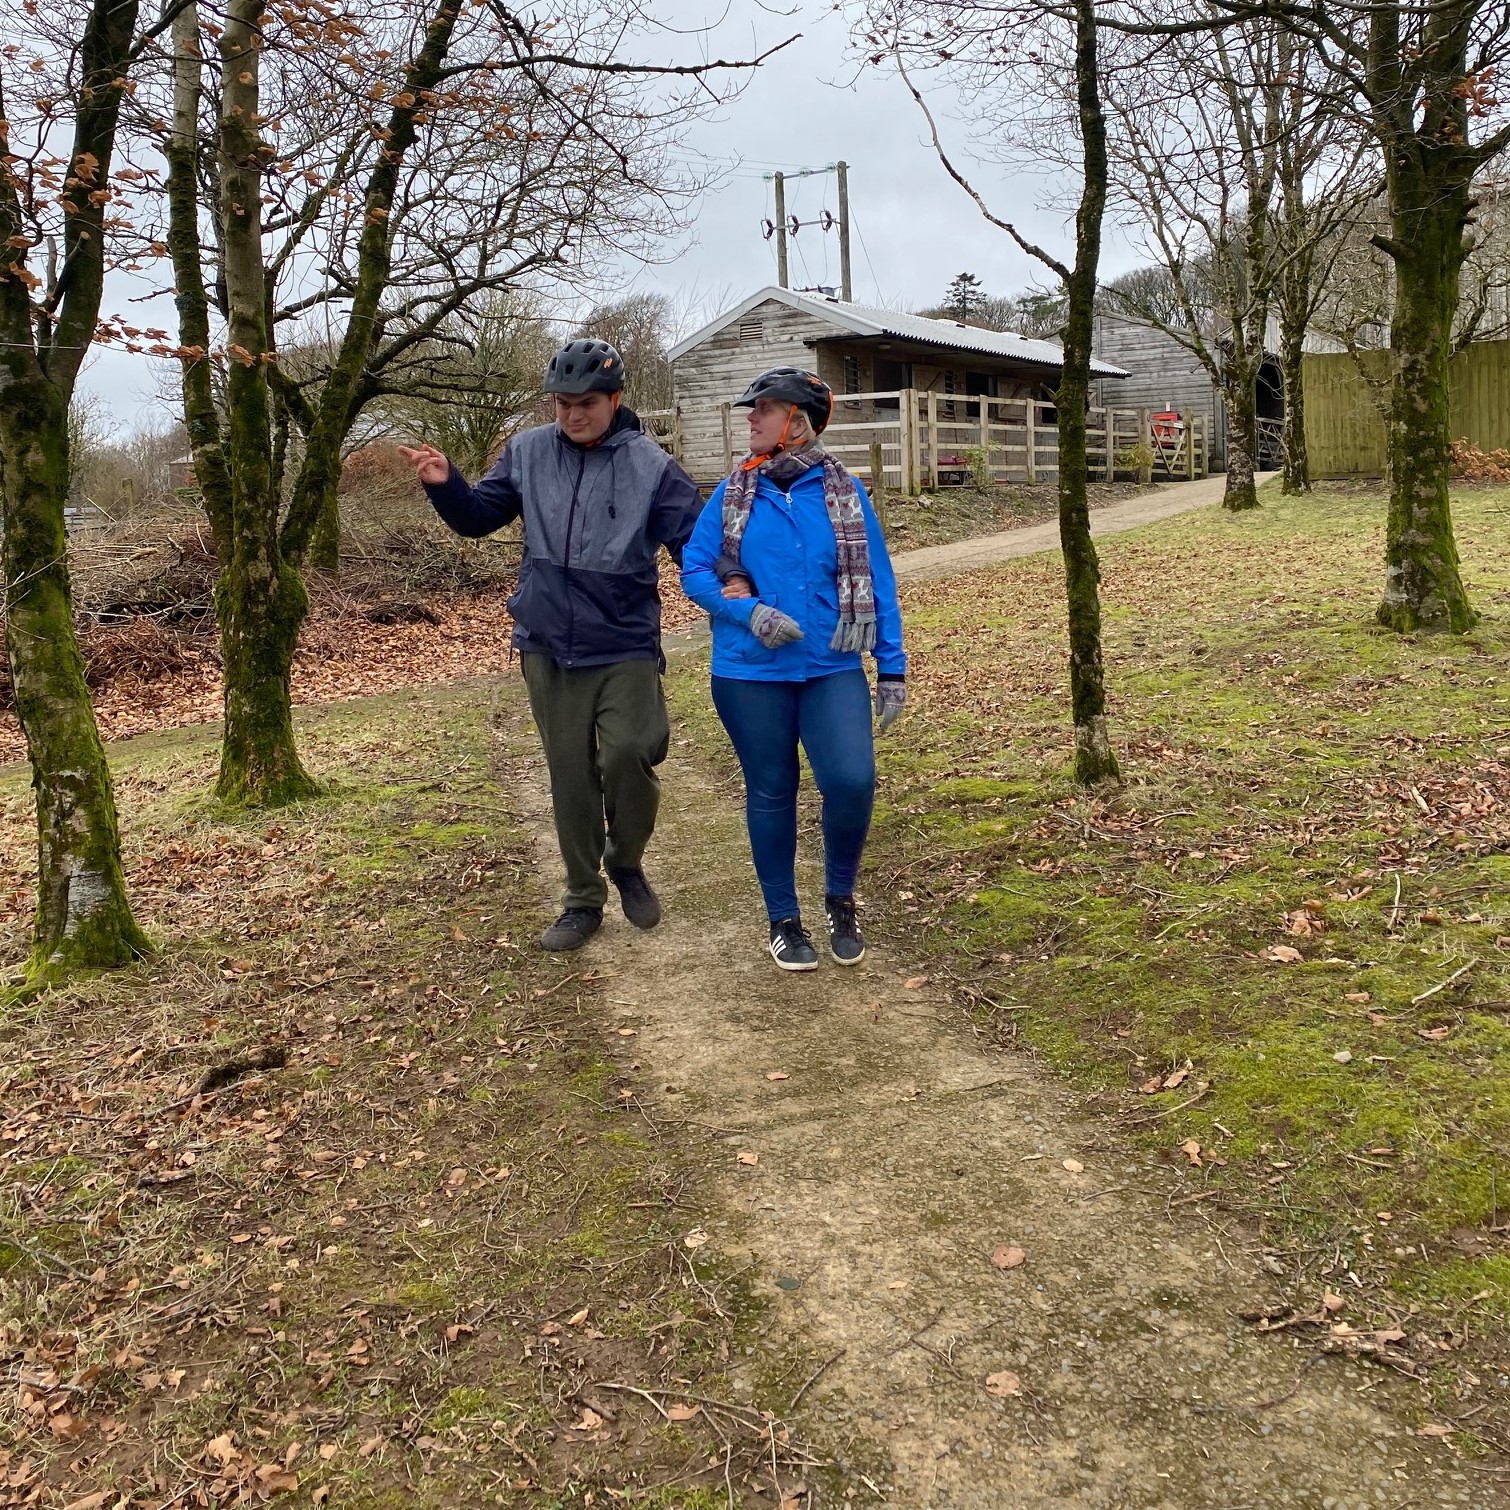 Two guests at Calvert Exmoor are walking down a path through woodlands wearing bike helmets. One guest has his arm resting on the arm of the woman next to him as they are walking.